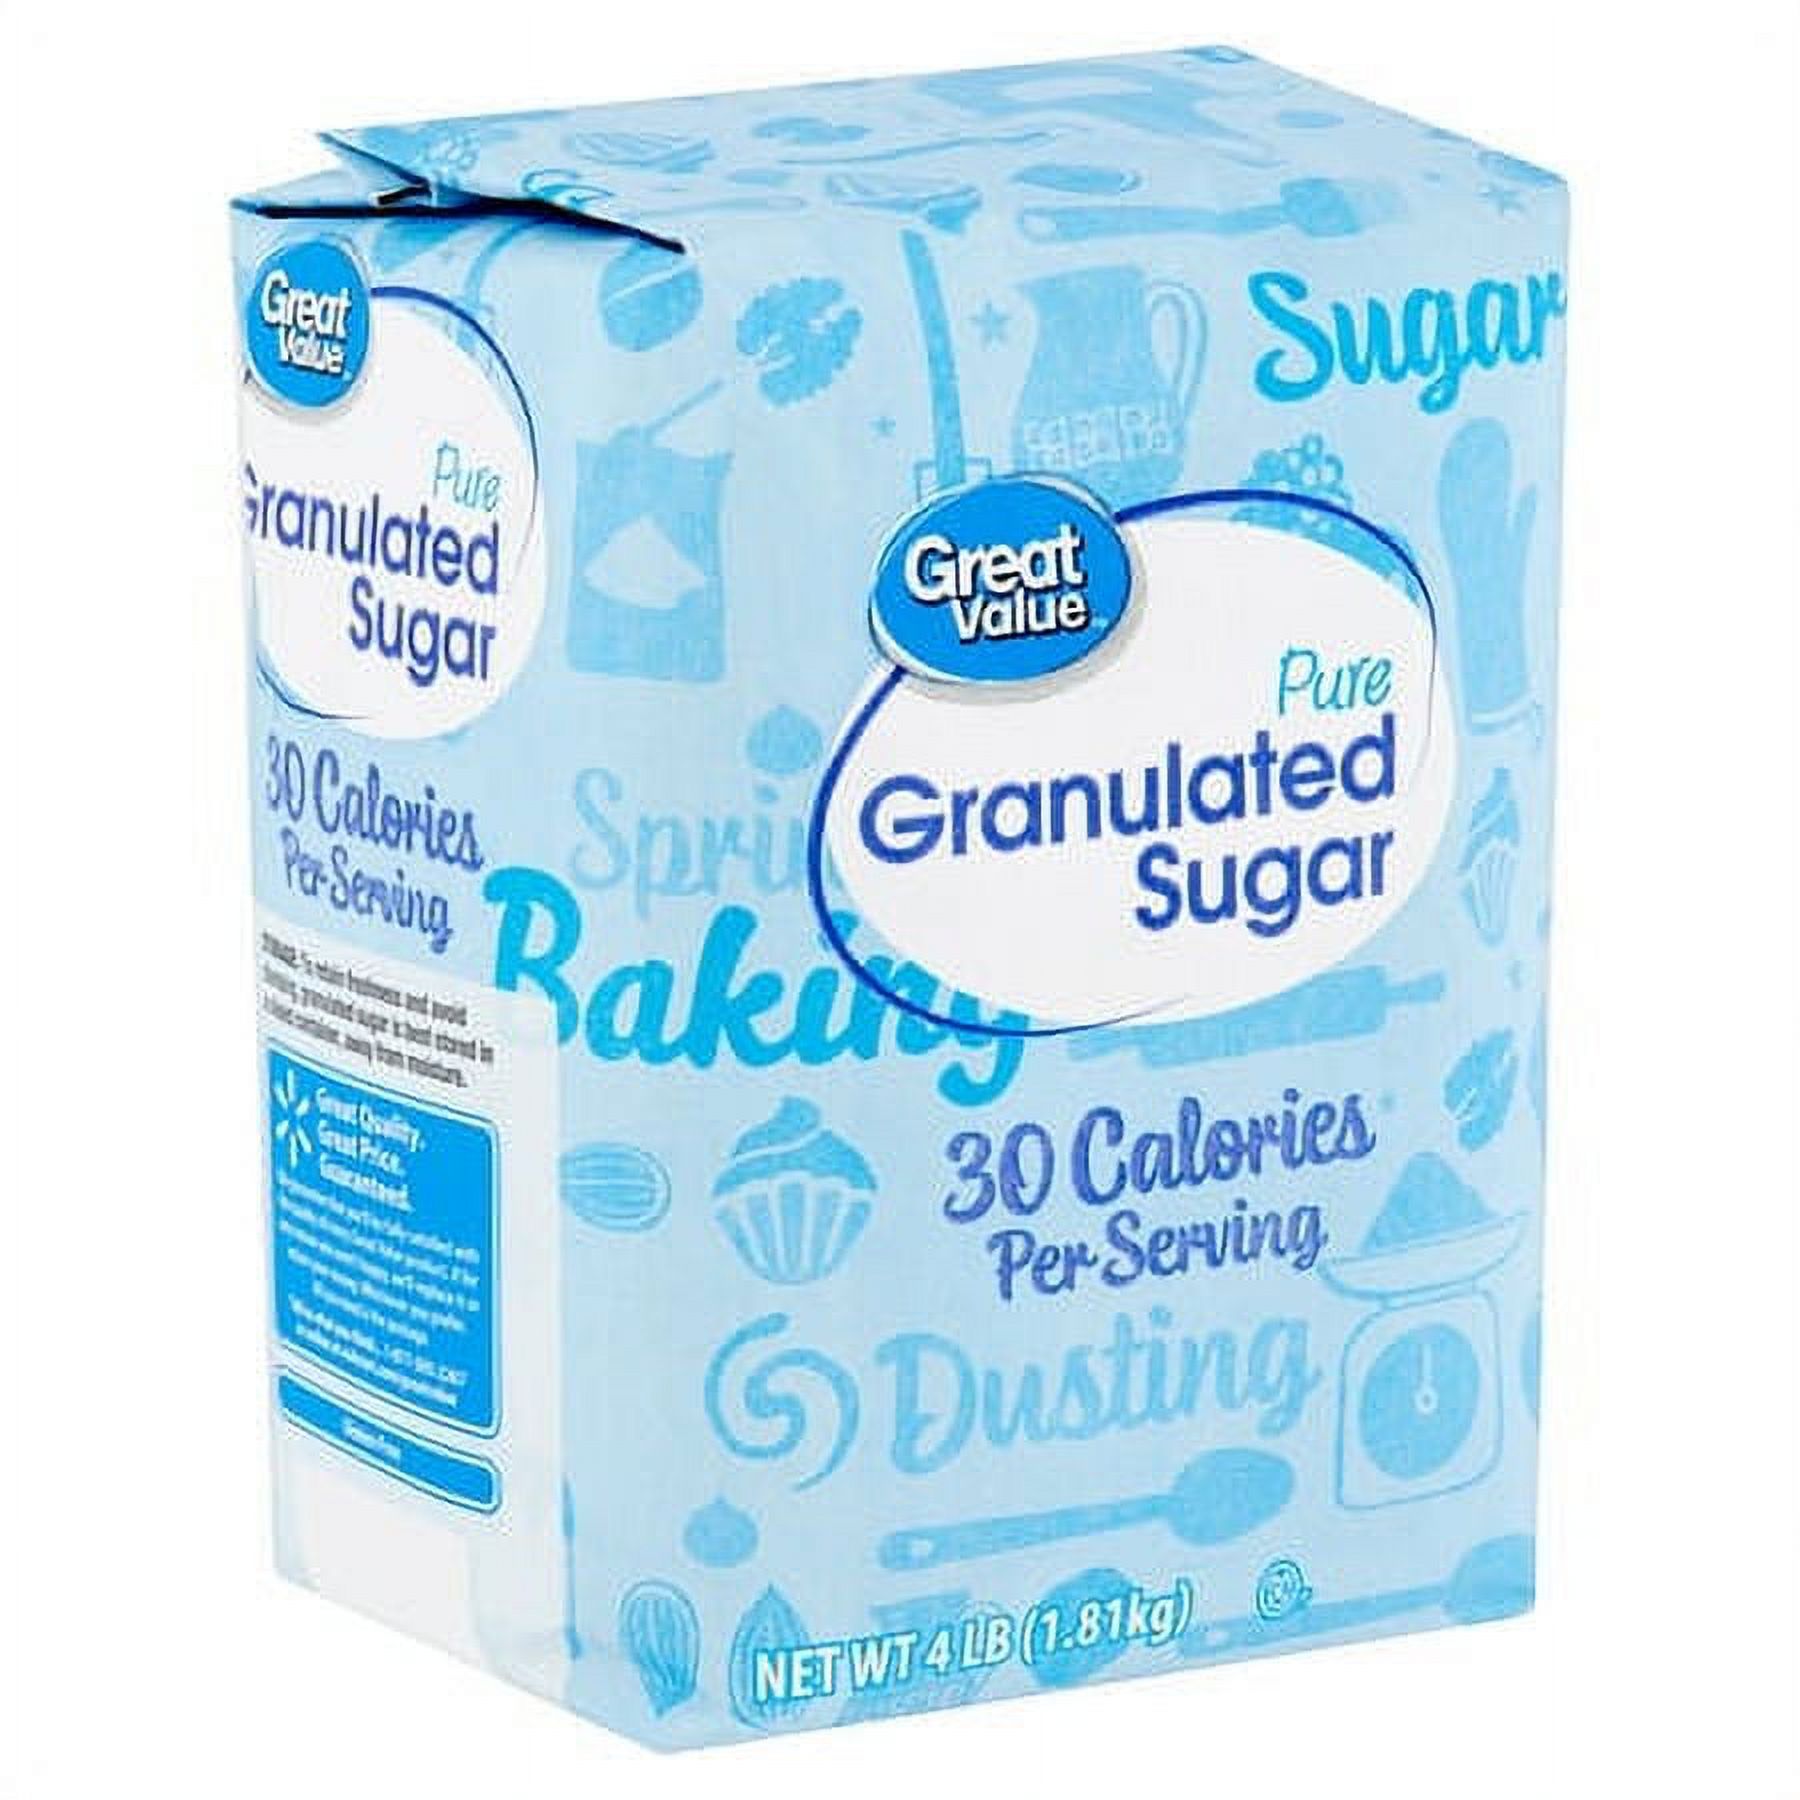 Great Value Pure Granulated Sugar, 4 lb - image 1 of 6